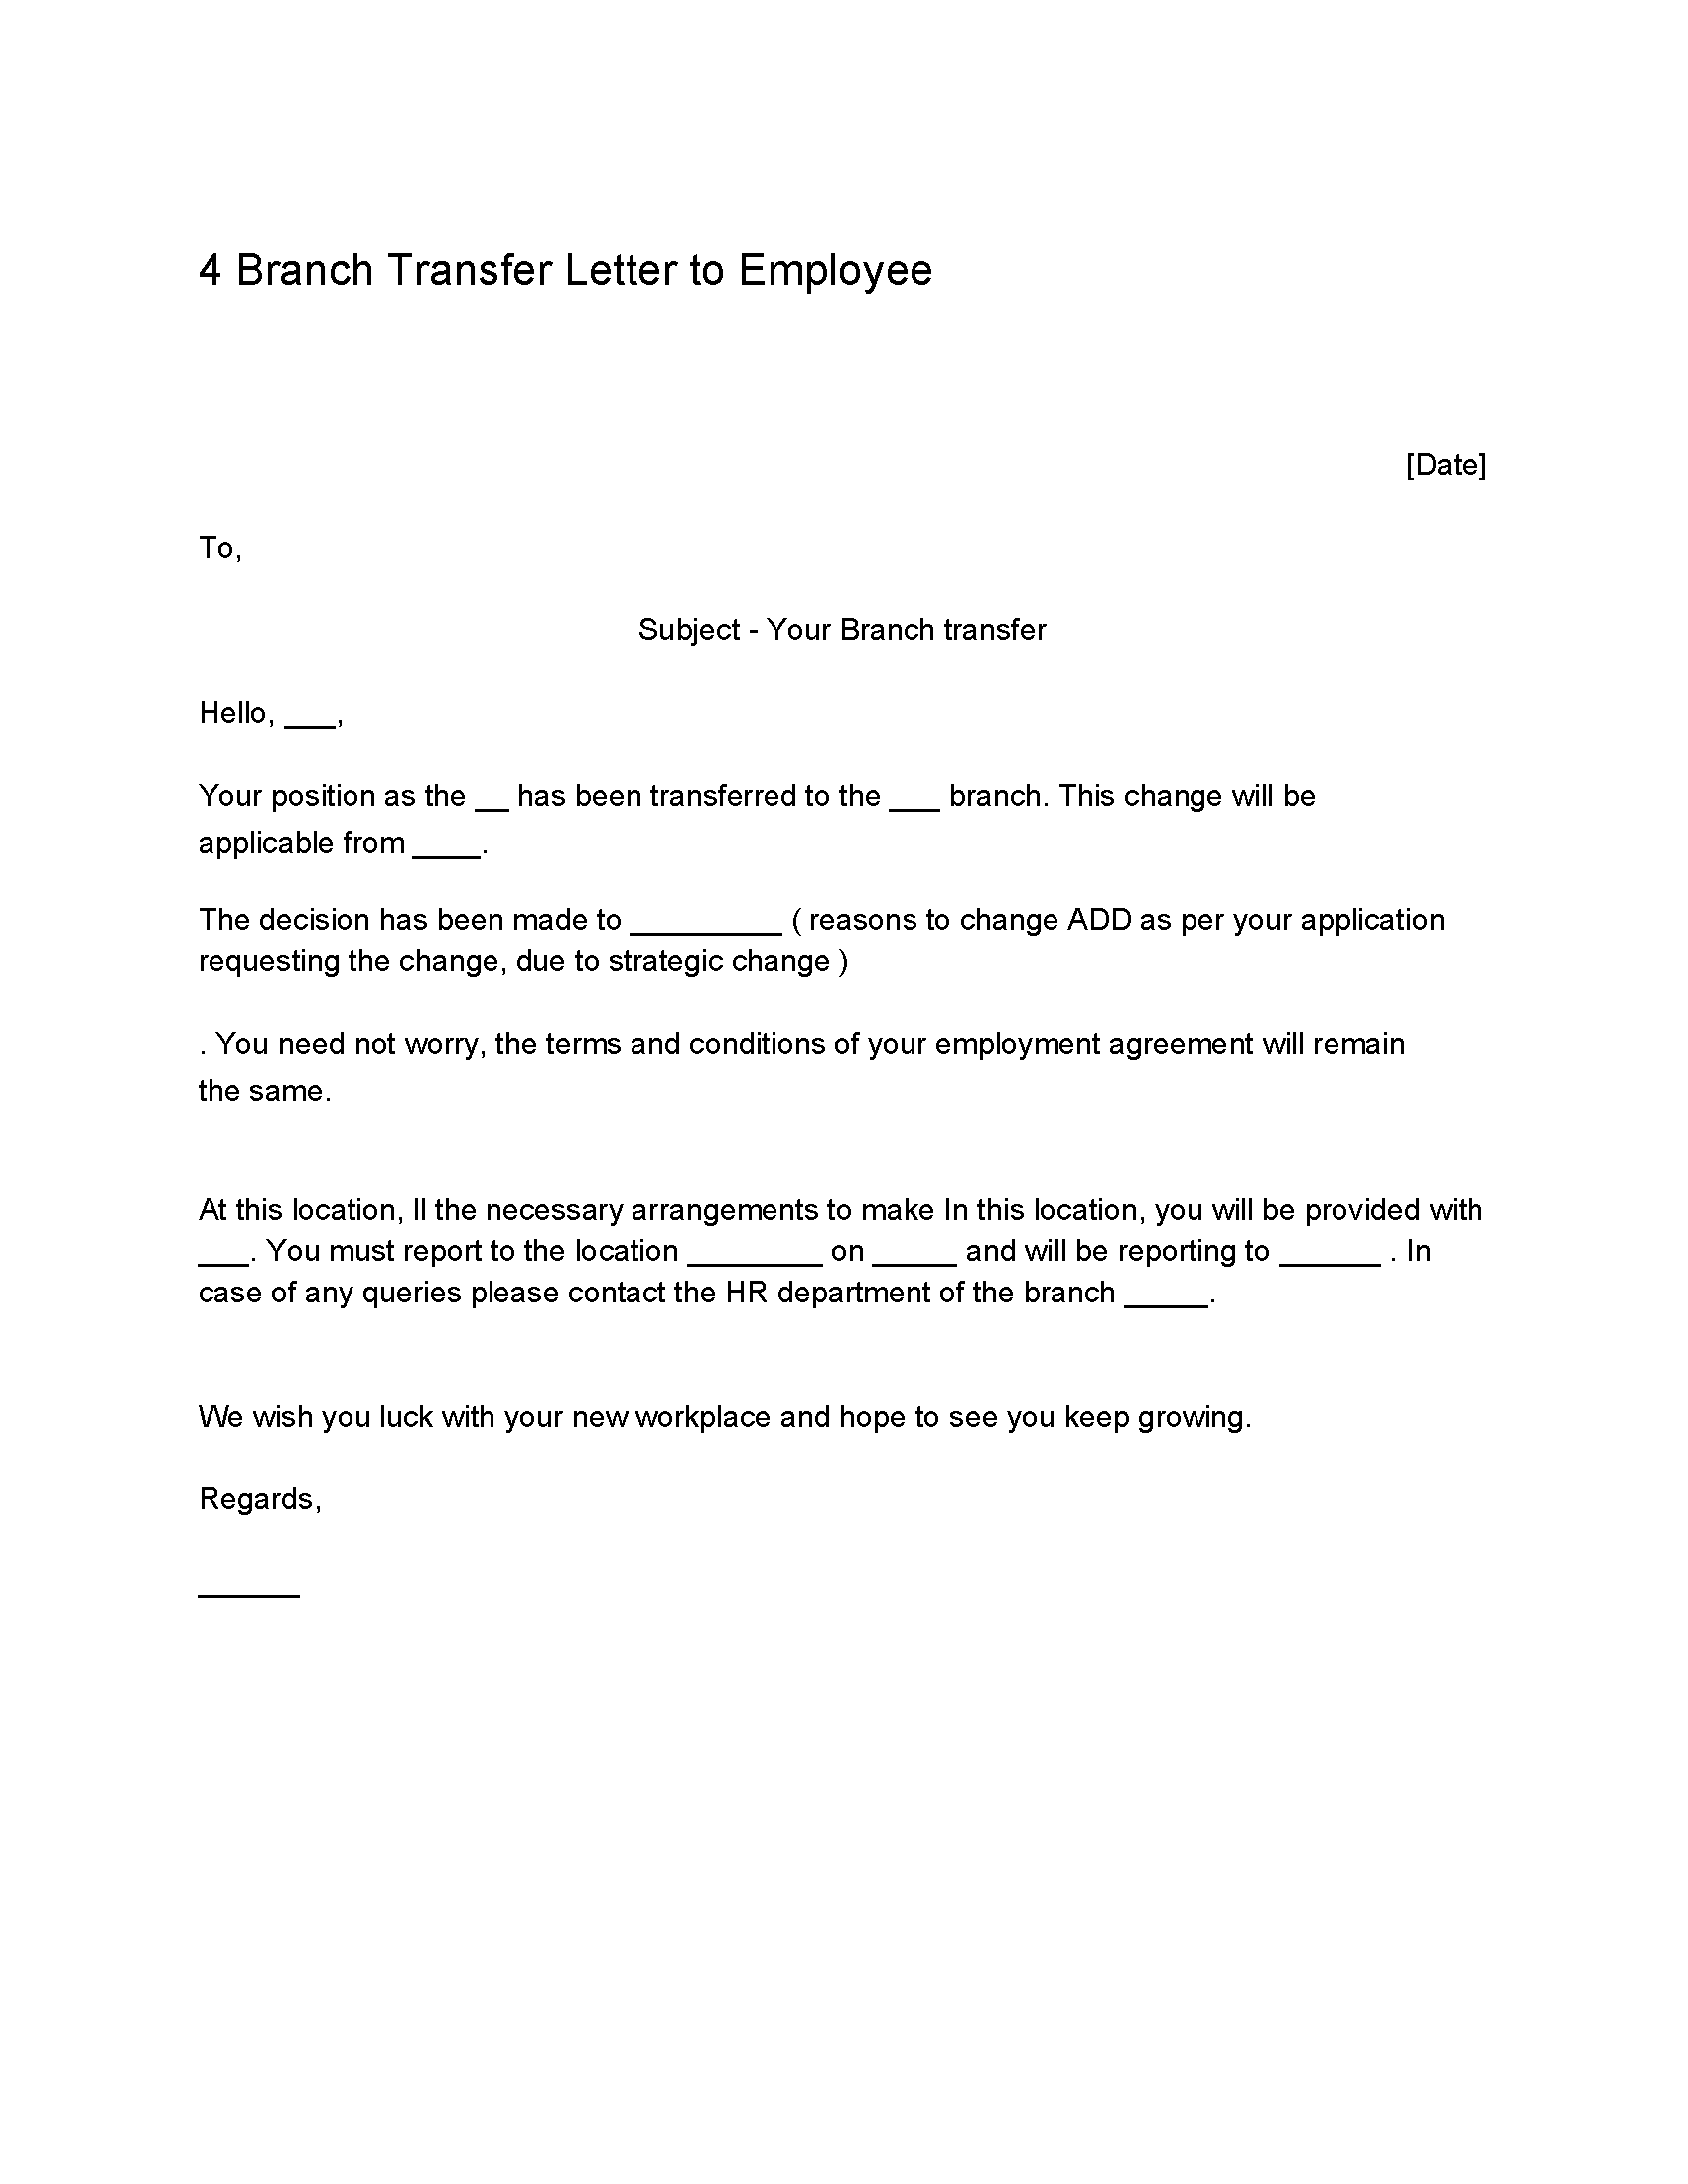 4 - Branch Transfer Letter To Employee